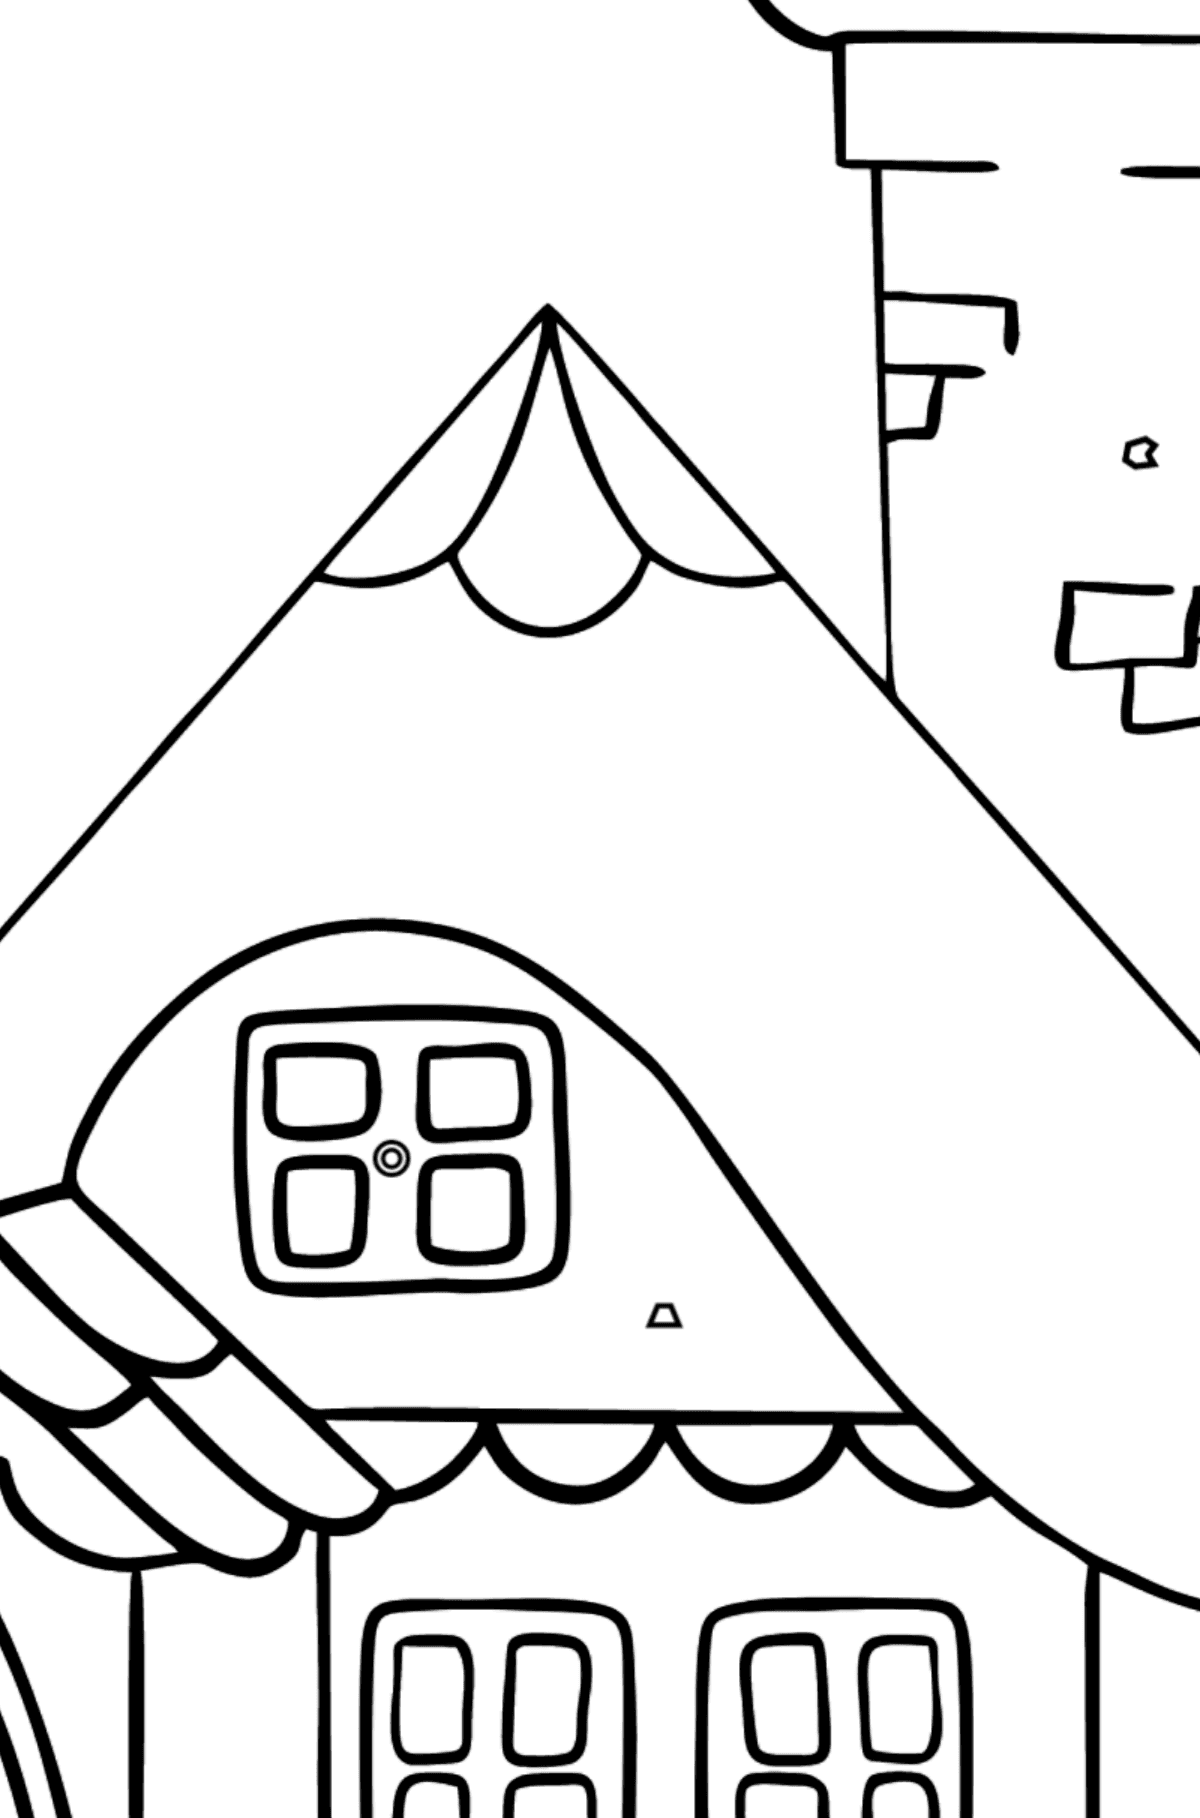 Simple Coloring Page - A Wonderful House - Coloring by Geometric Shapes for Kids